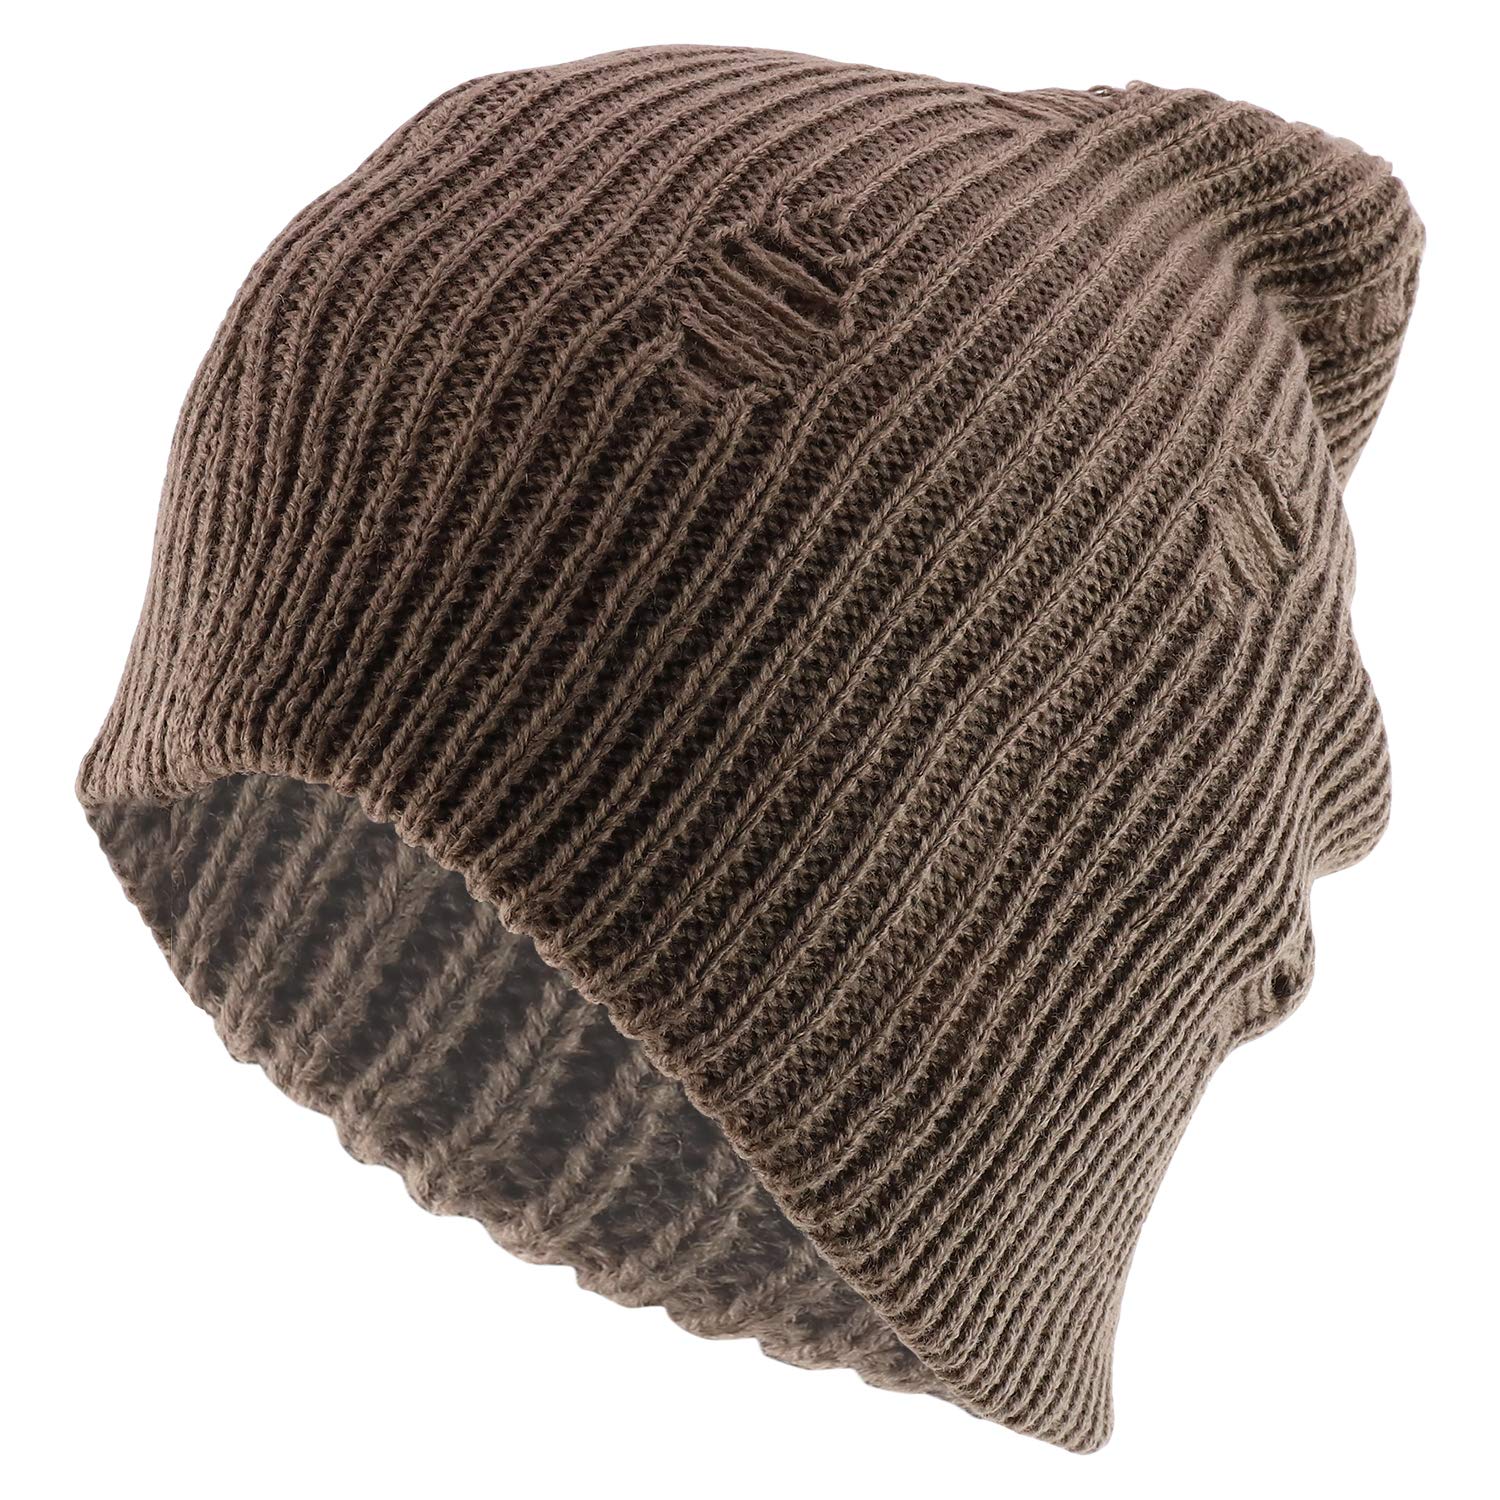 Armycrew Vintage Frayed Pattern Knit Deep Slouchy Beanie - Taupe